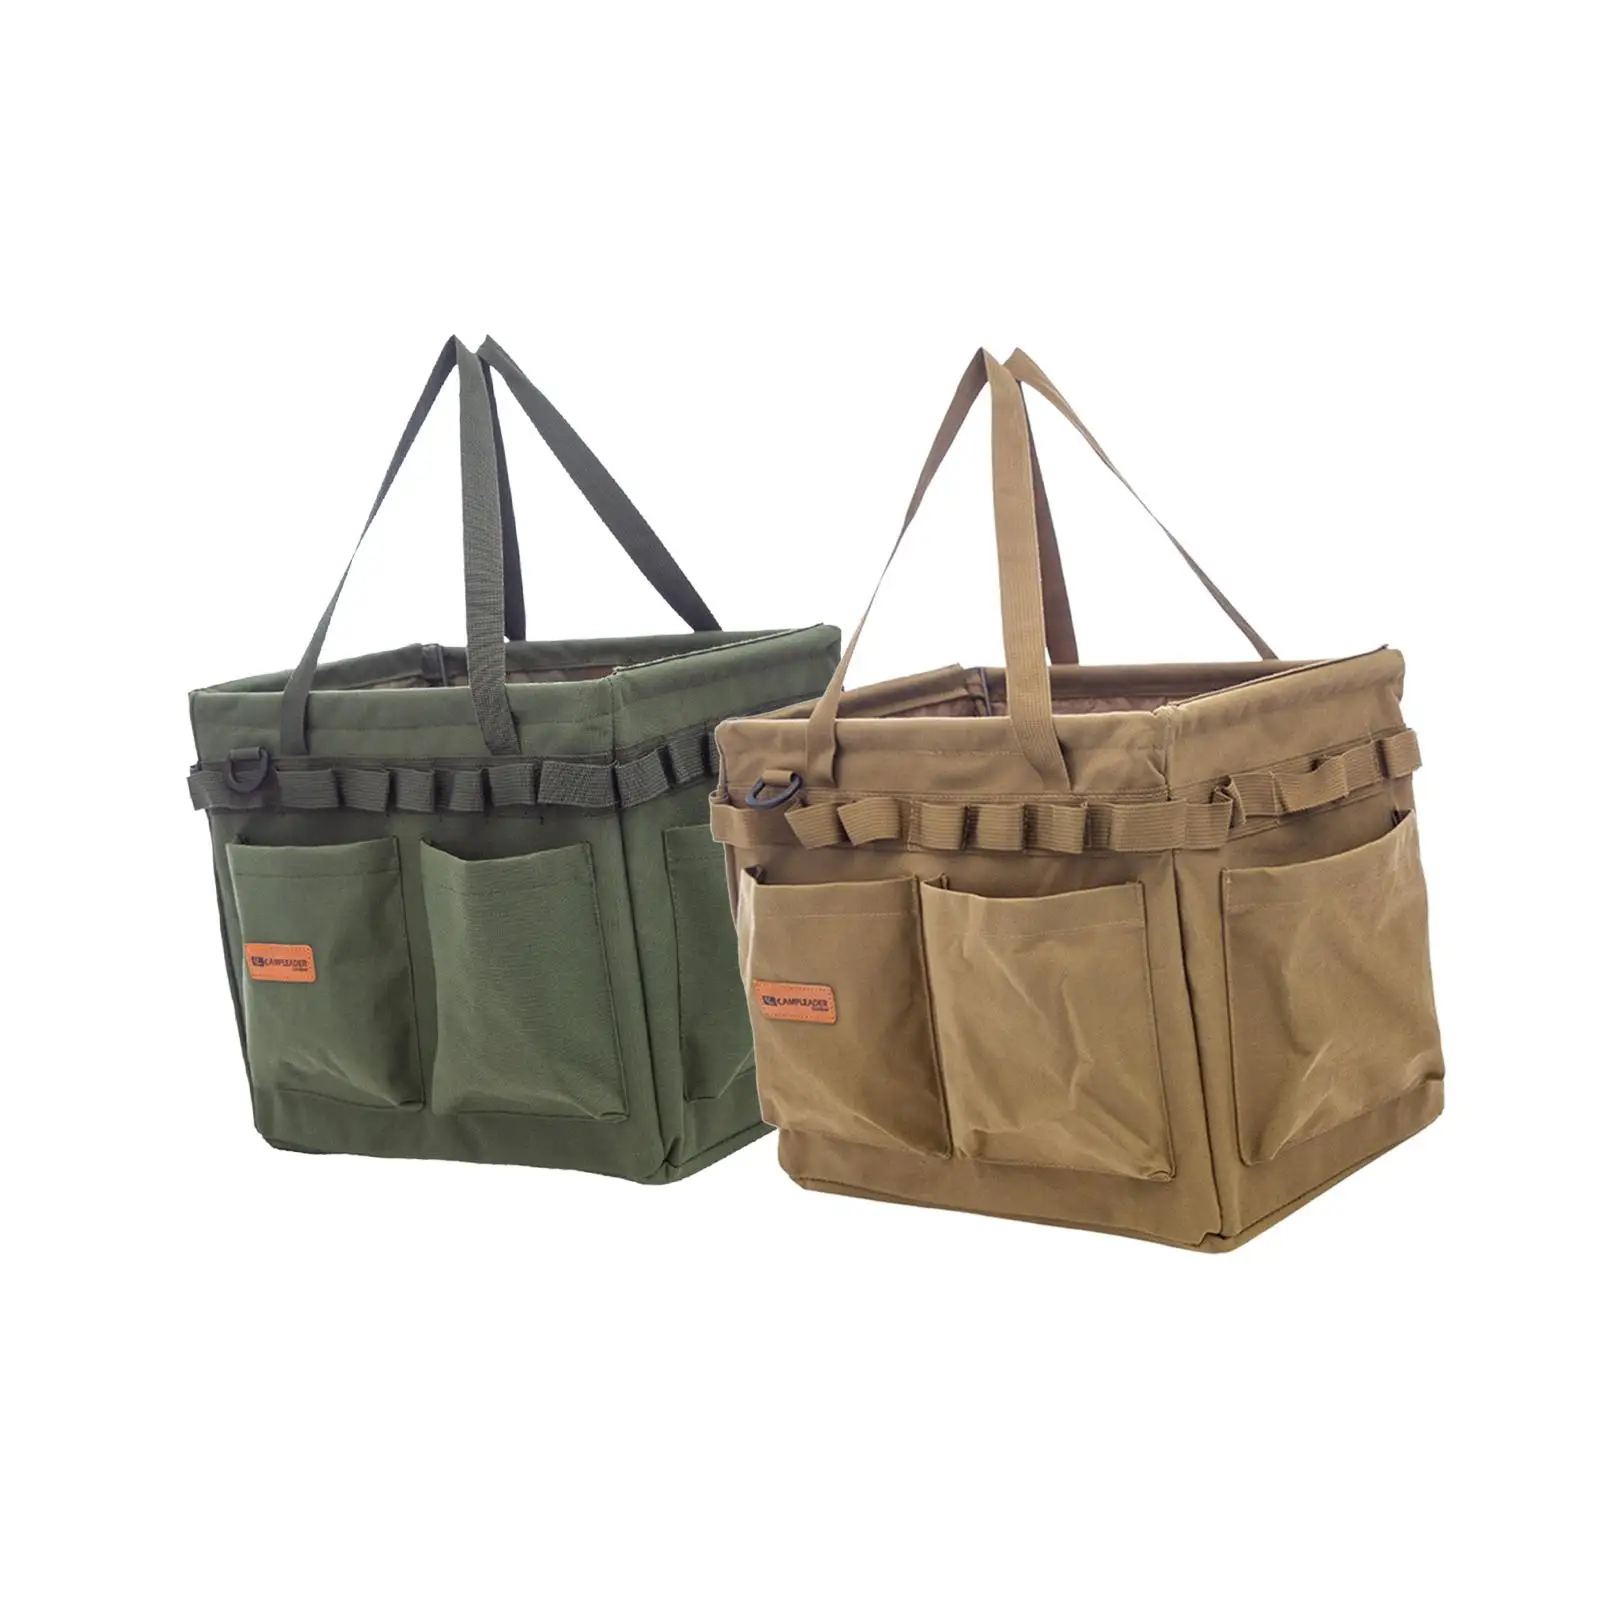 Portable Storage Picnic Finishing Bag Foldable with Carry Handles Package Reusable Waterproof Tool Bag for BBQ Camping